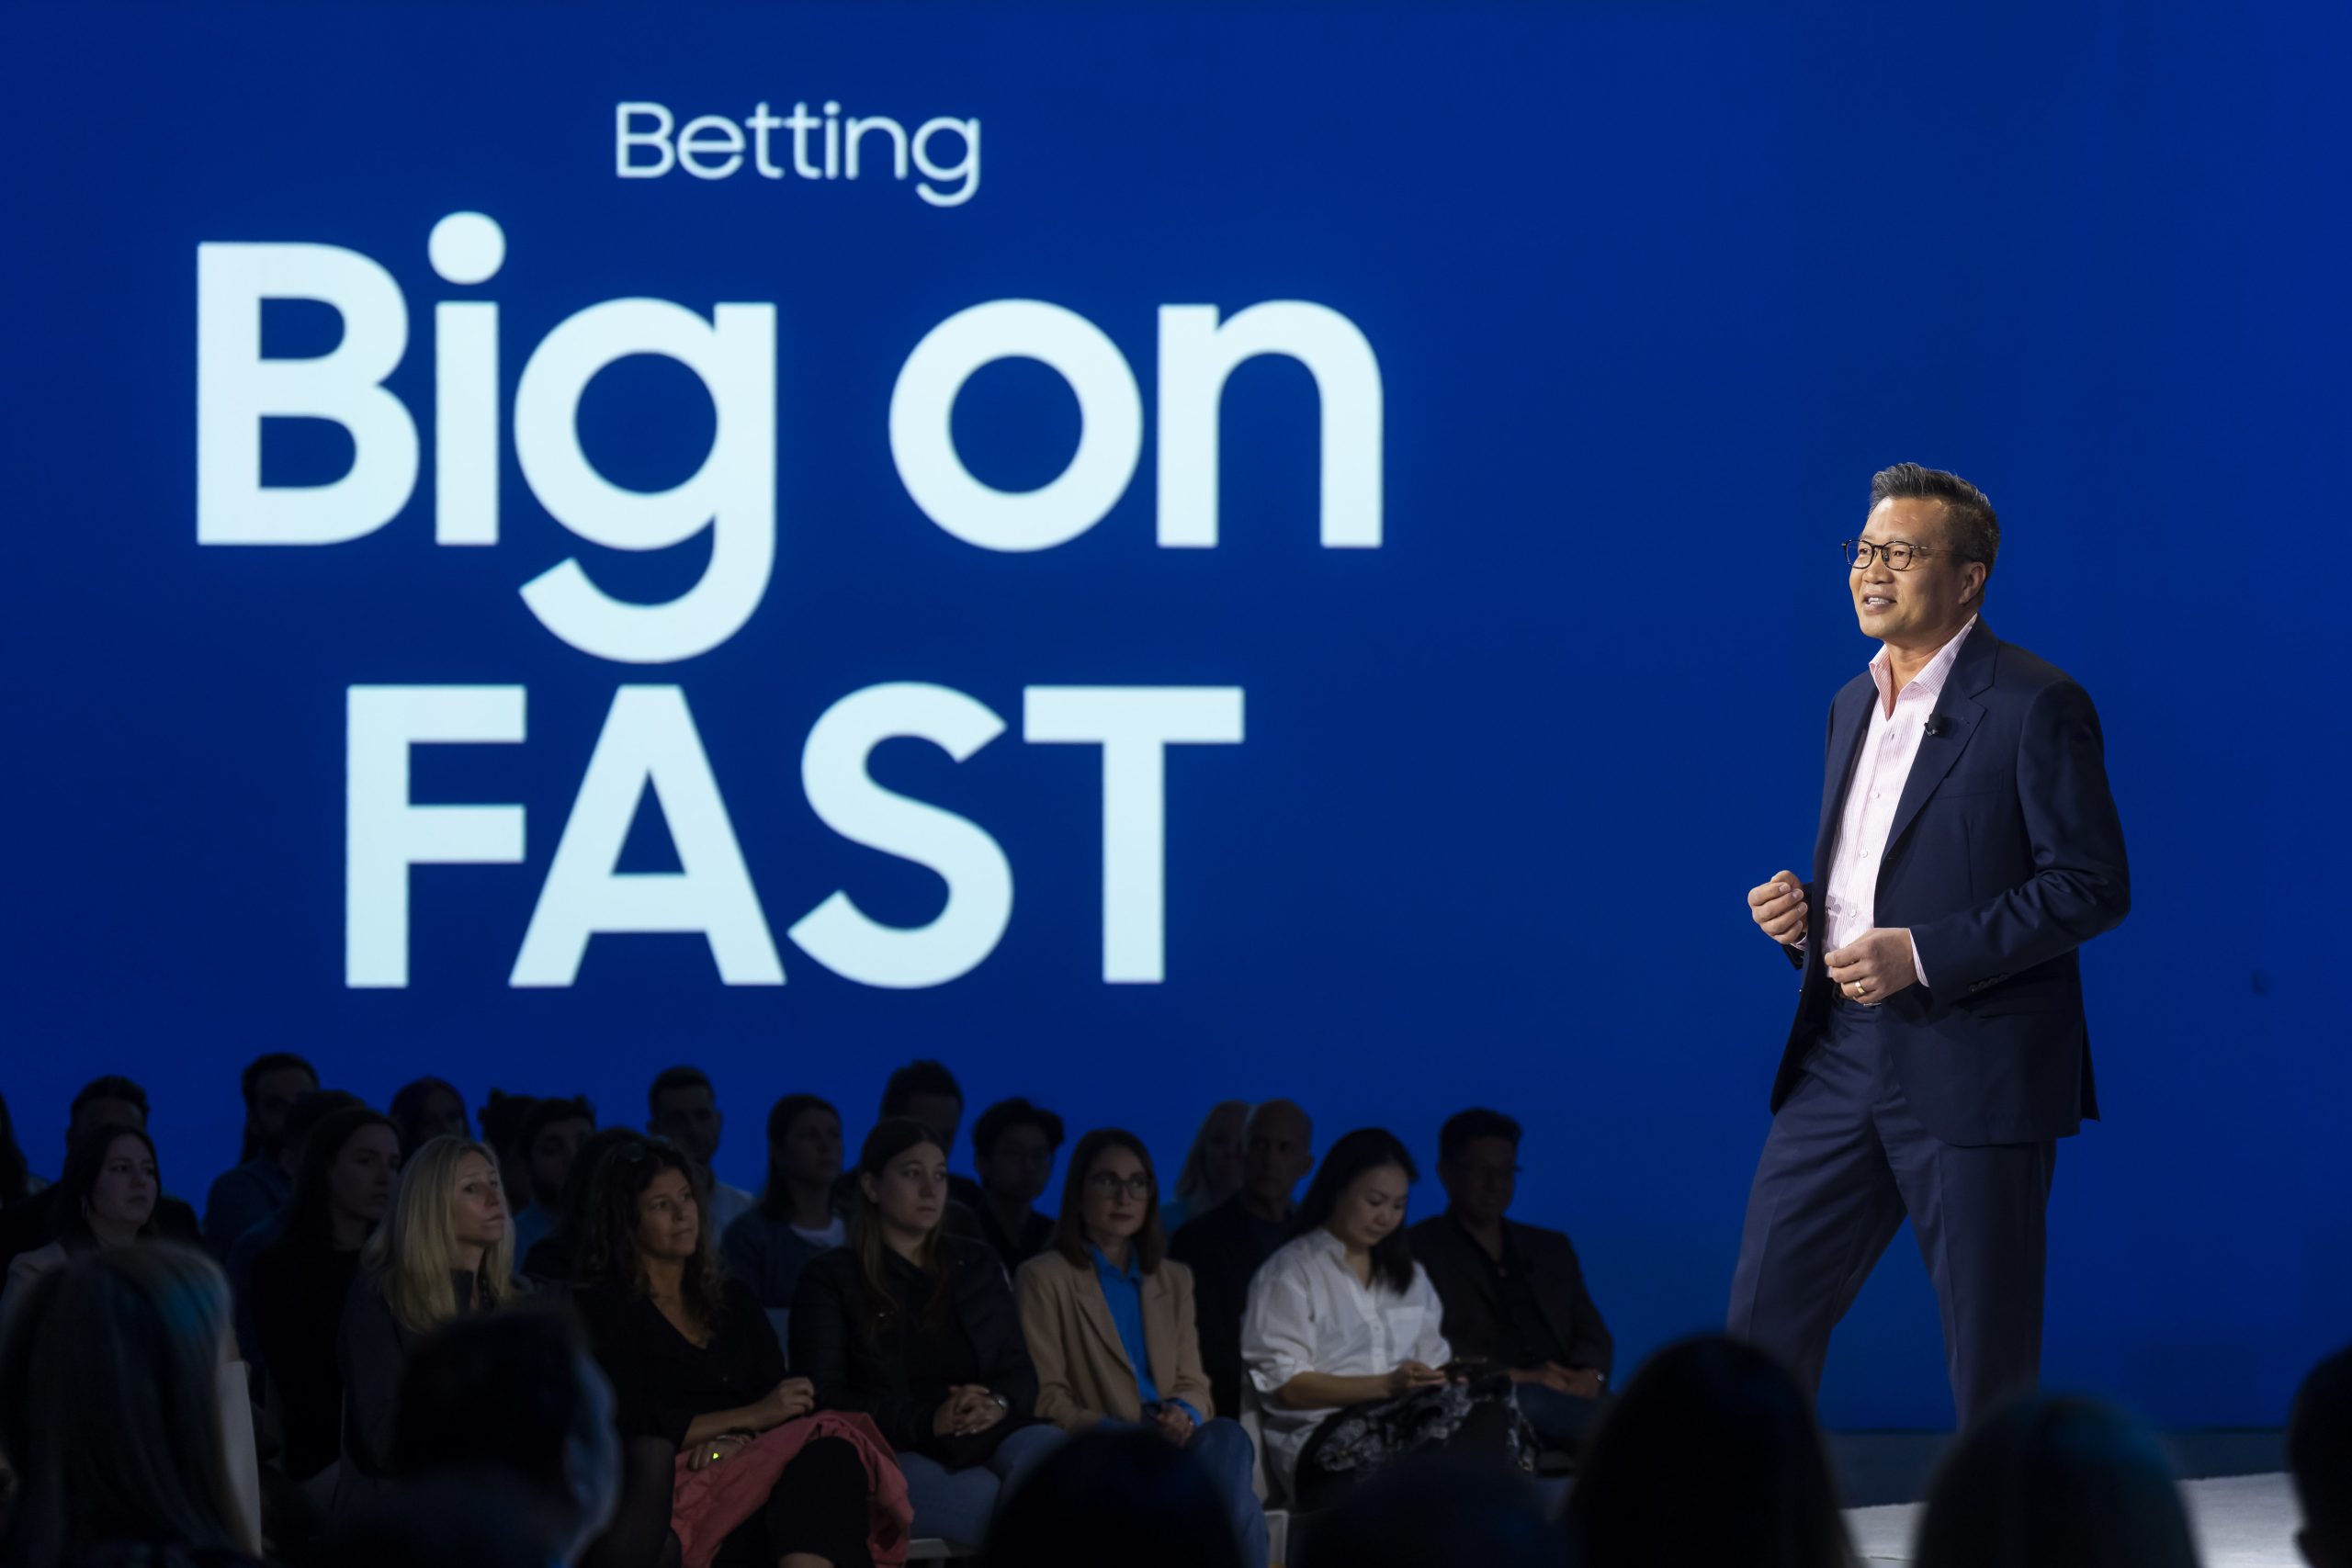 Speaker in front of a sign that states Betting Big on Fast